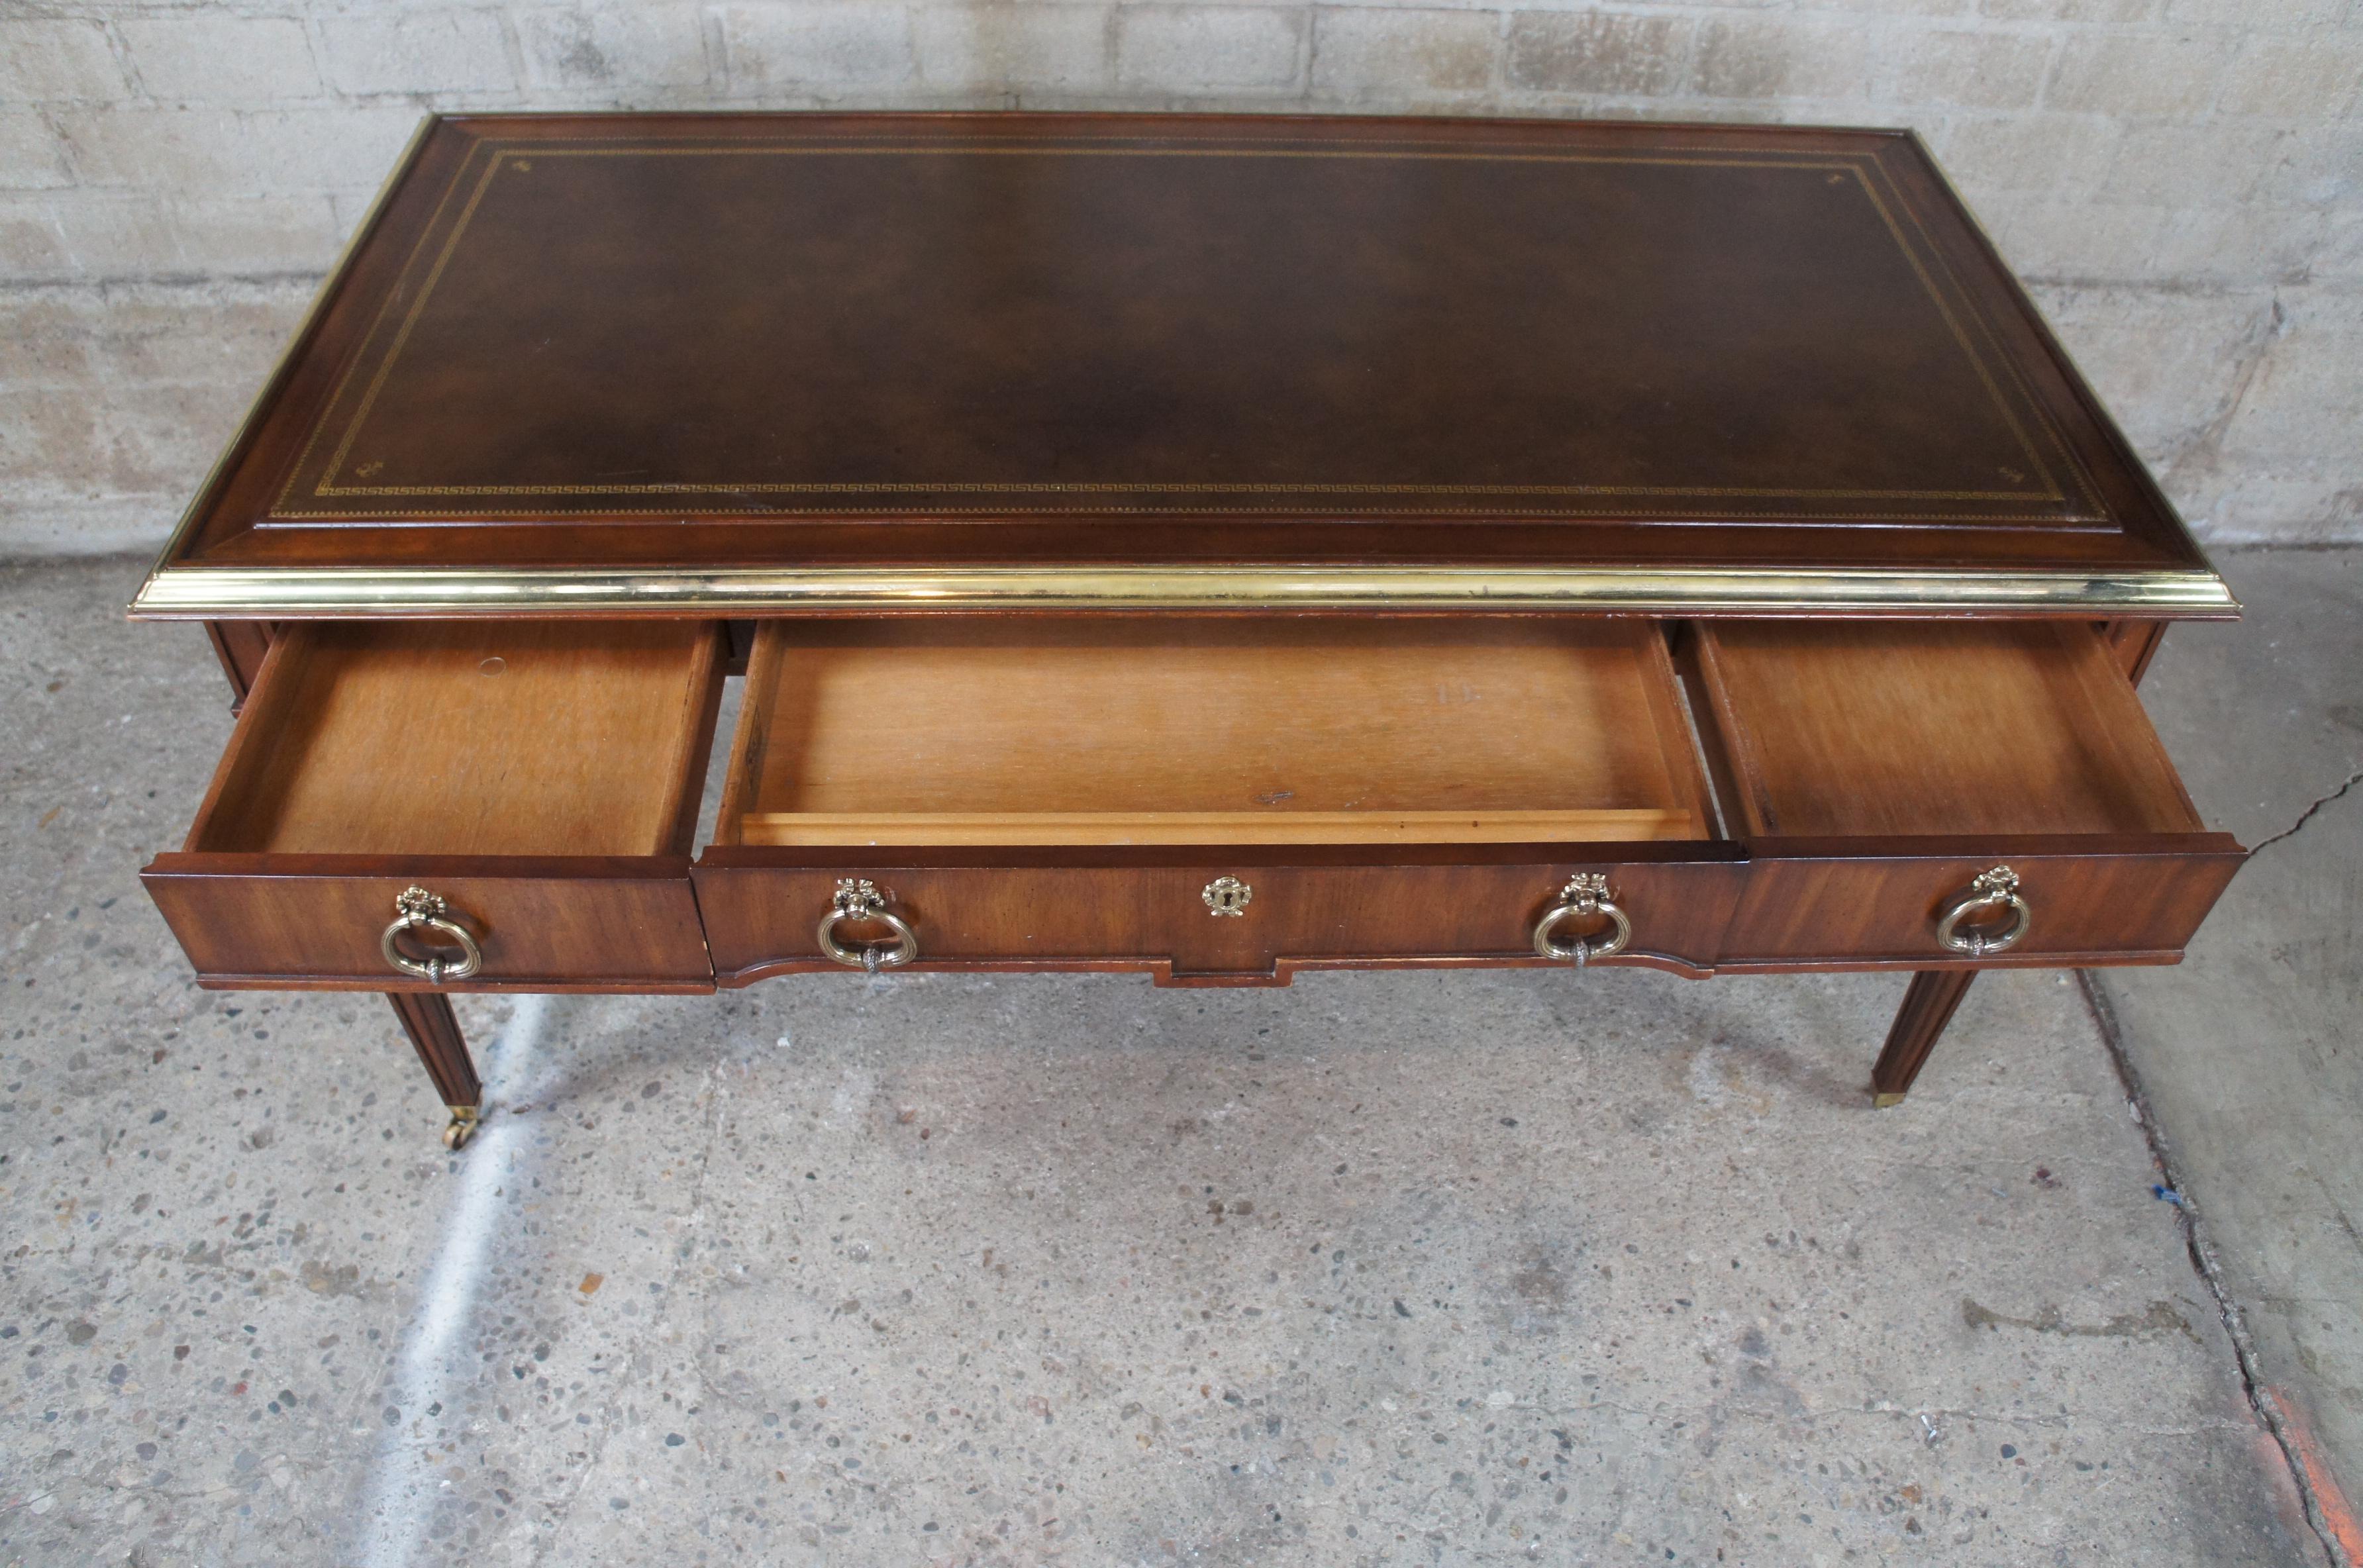 Vintage Sligh Neoclassical Revival Mahogany & Brass Tooled Leather Writing Desk 1